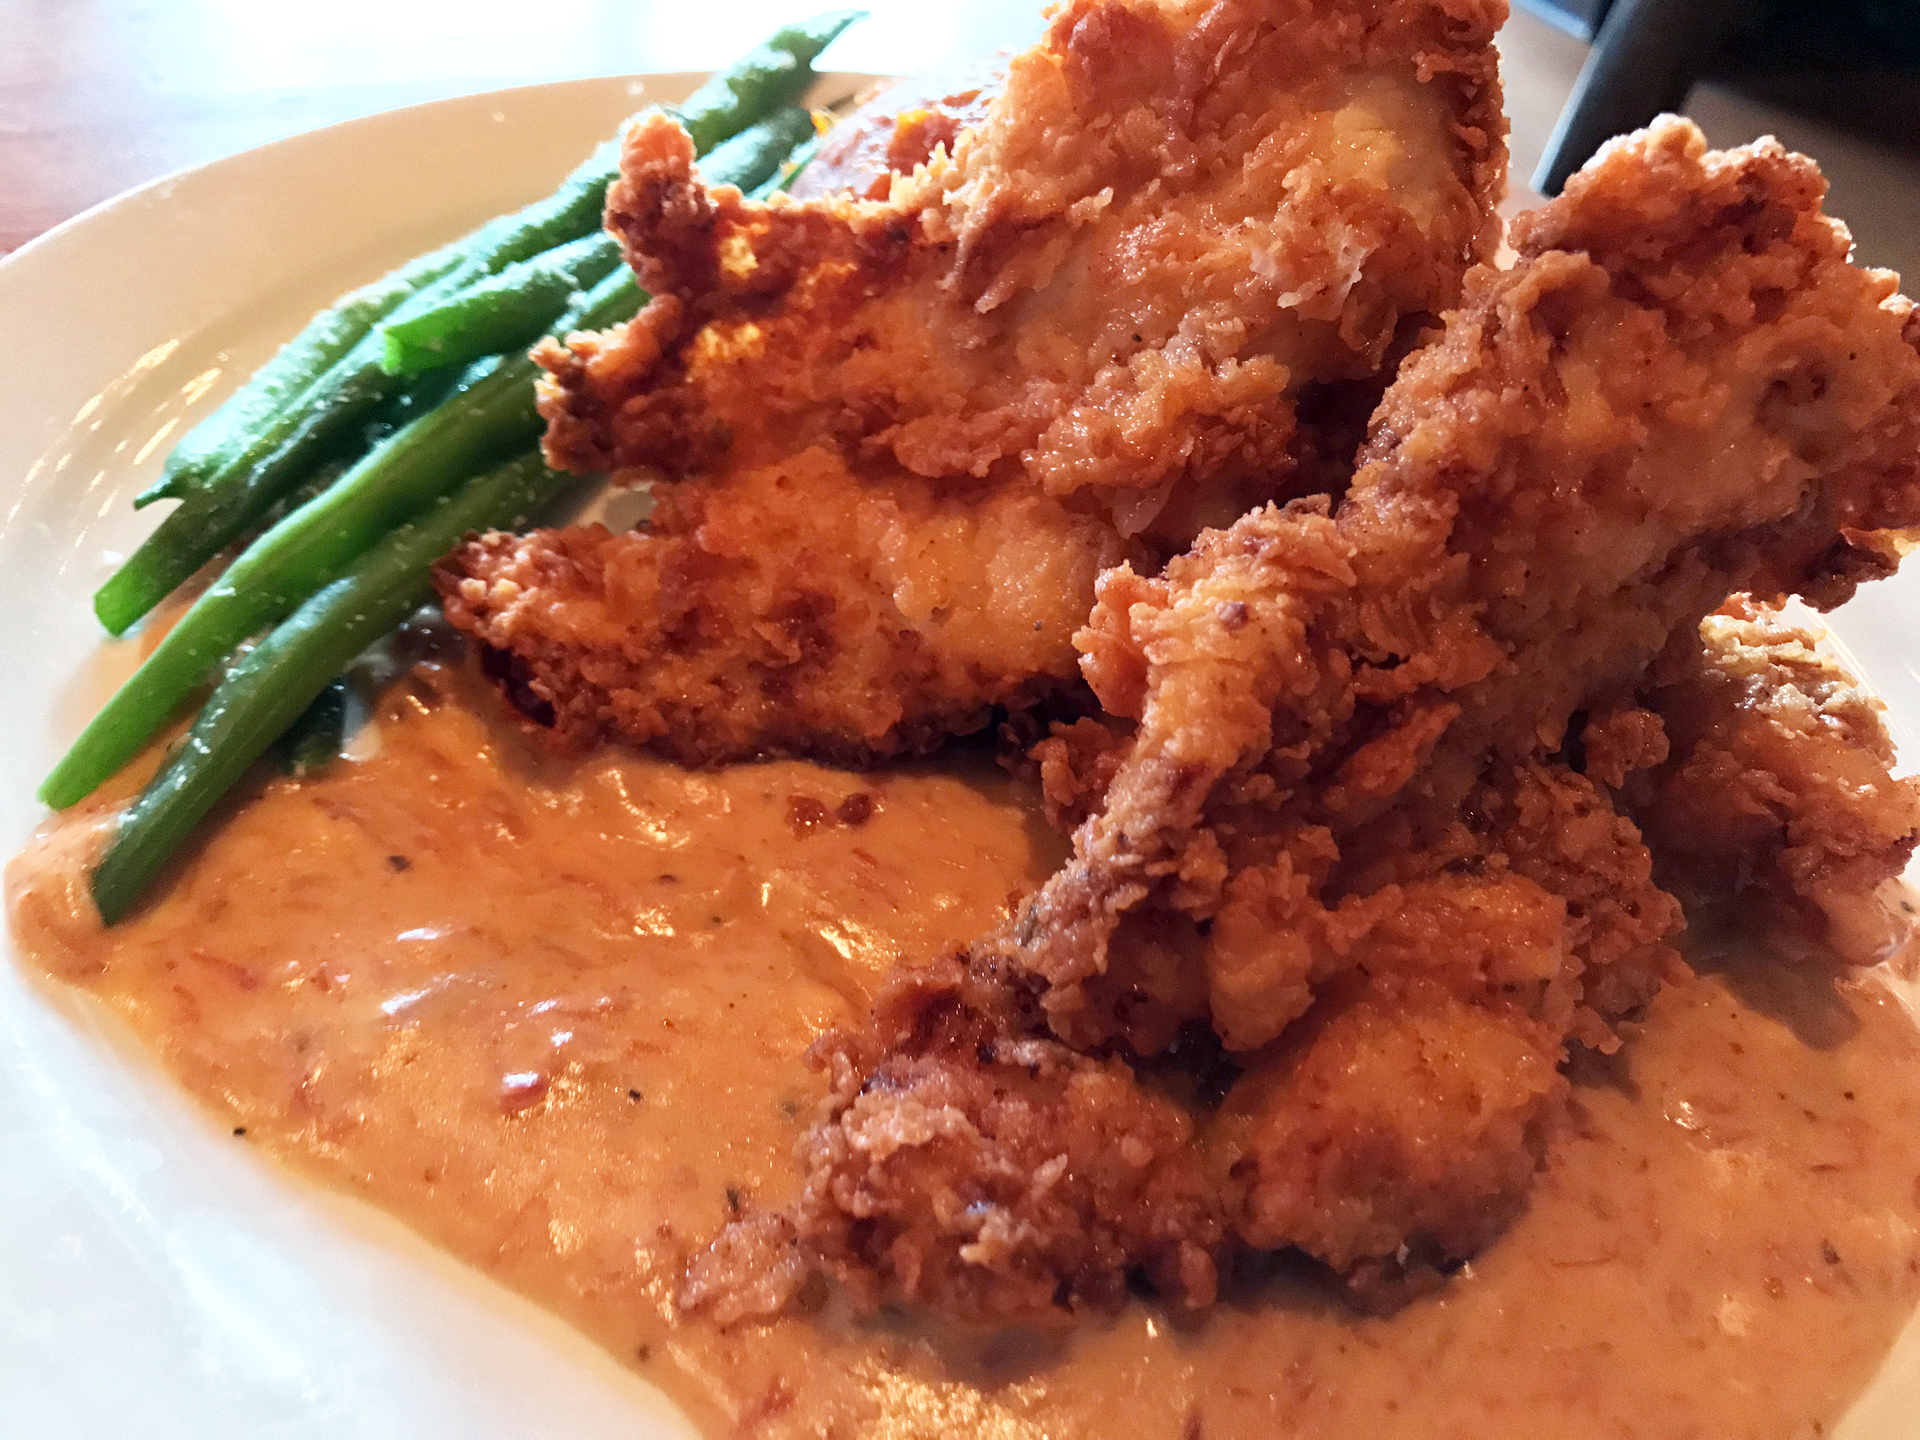 Downtown Berkeley's Angeline's does fried chicken with a New Orleans twist.